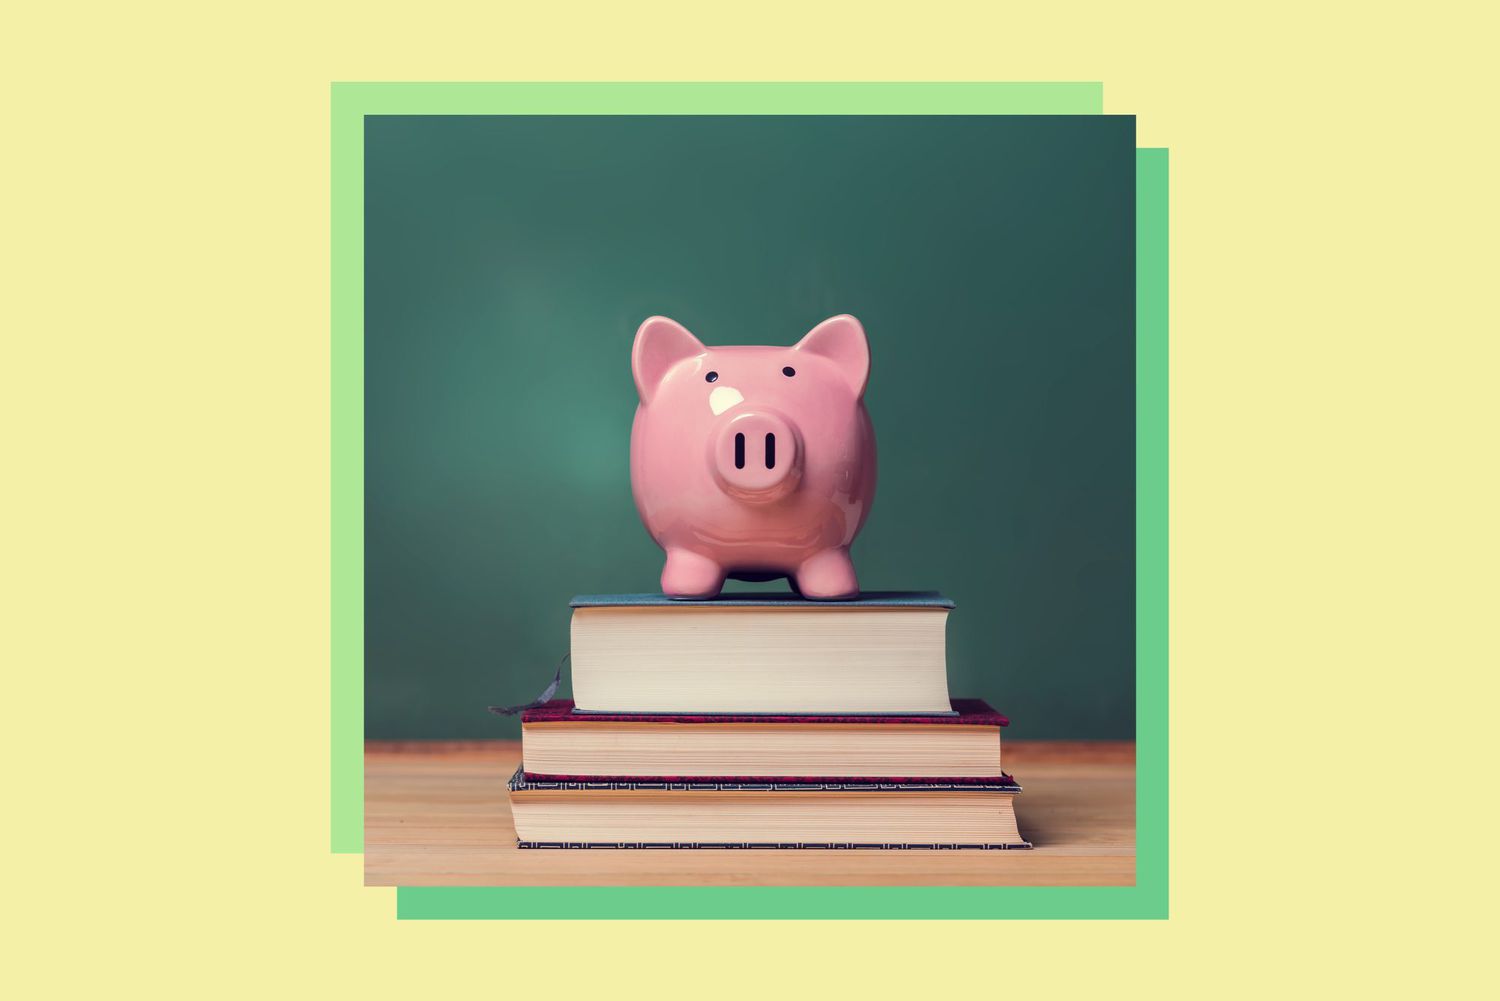 An image of a piggy bank on top of books.